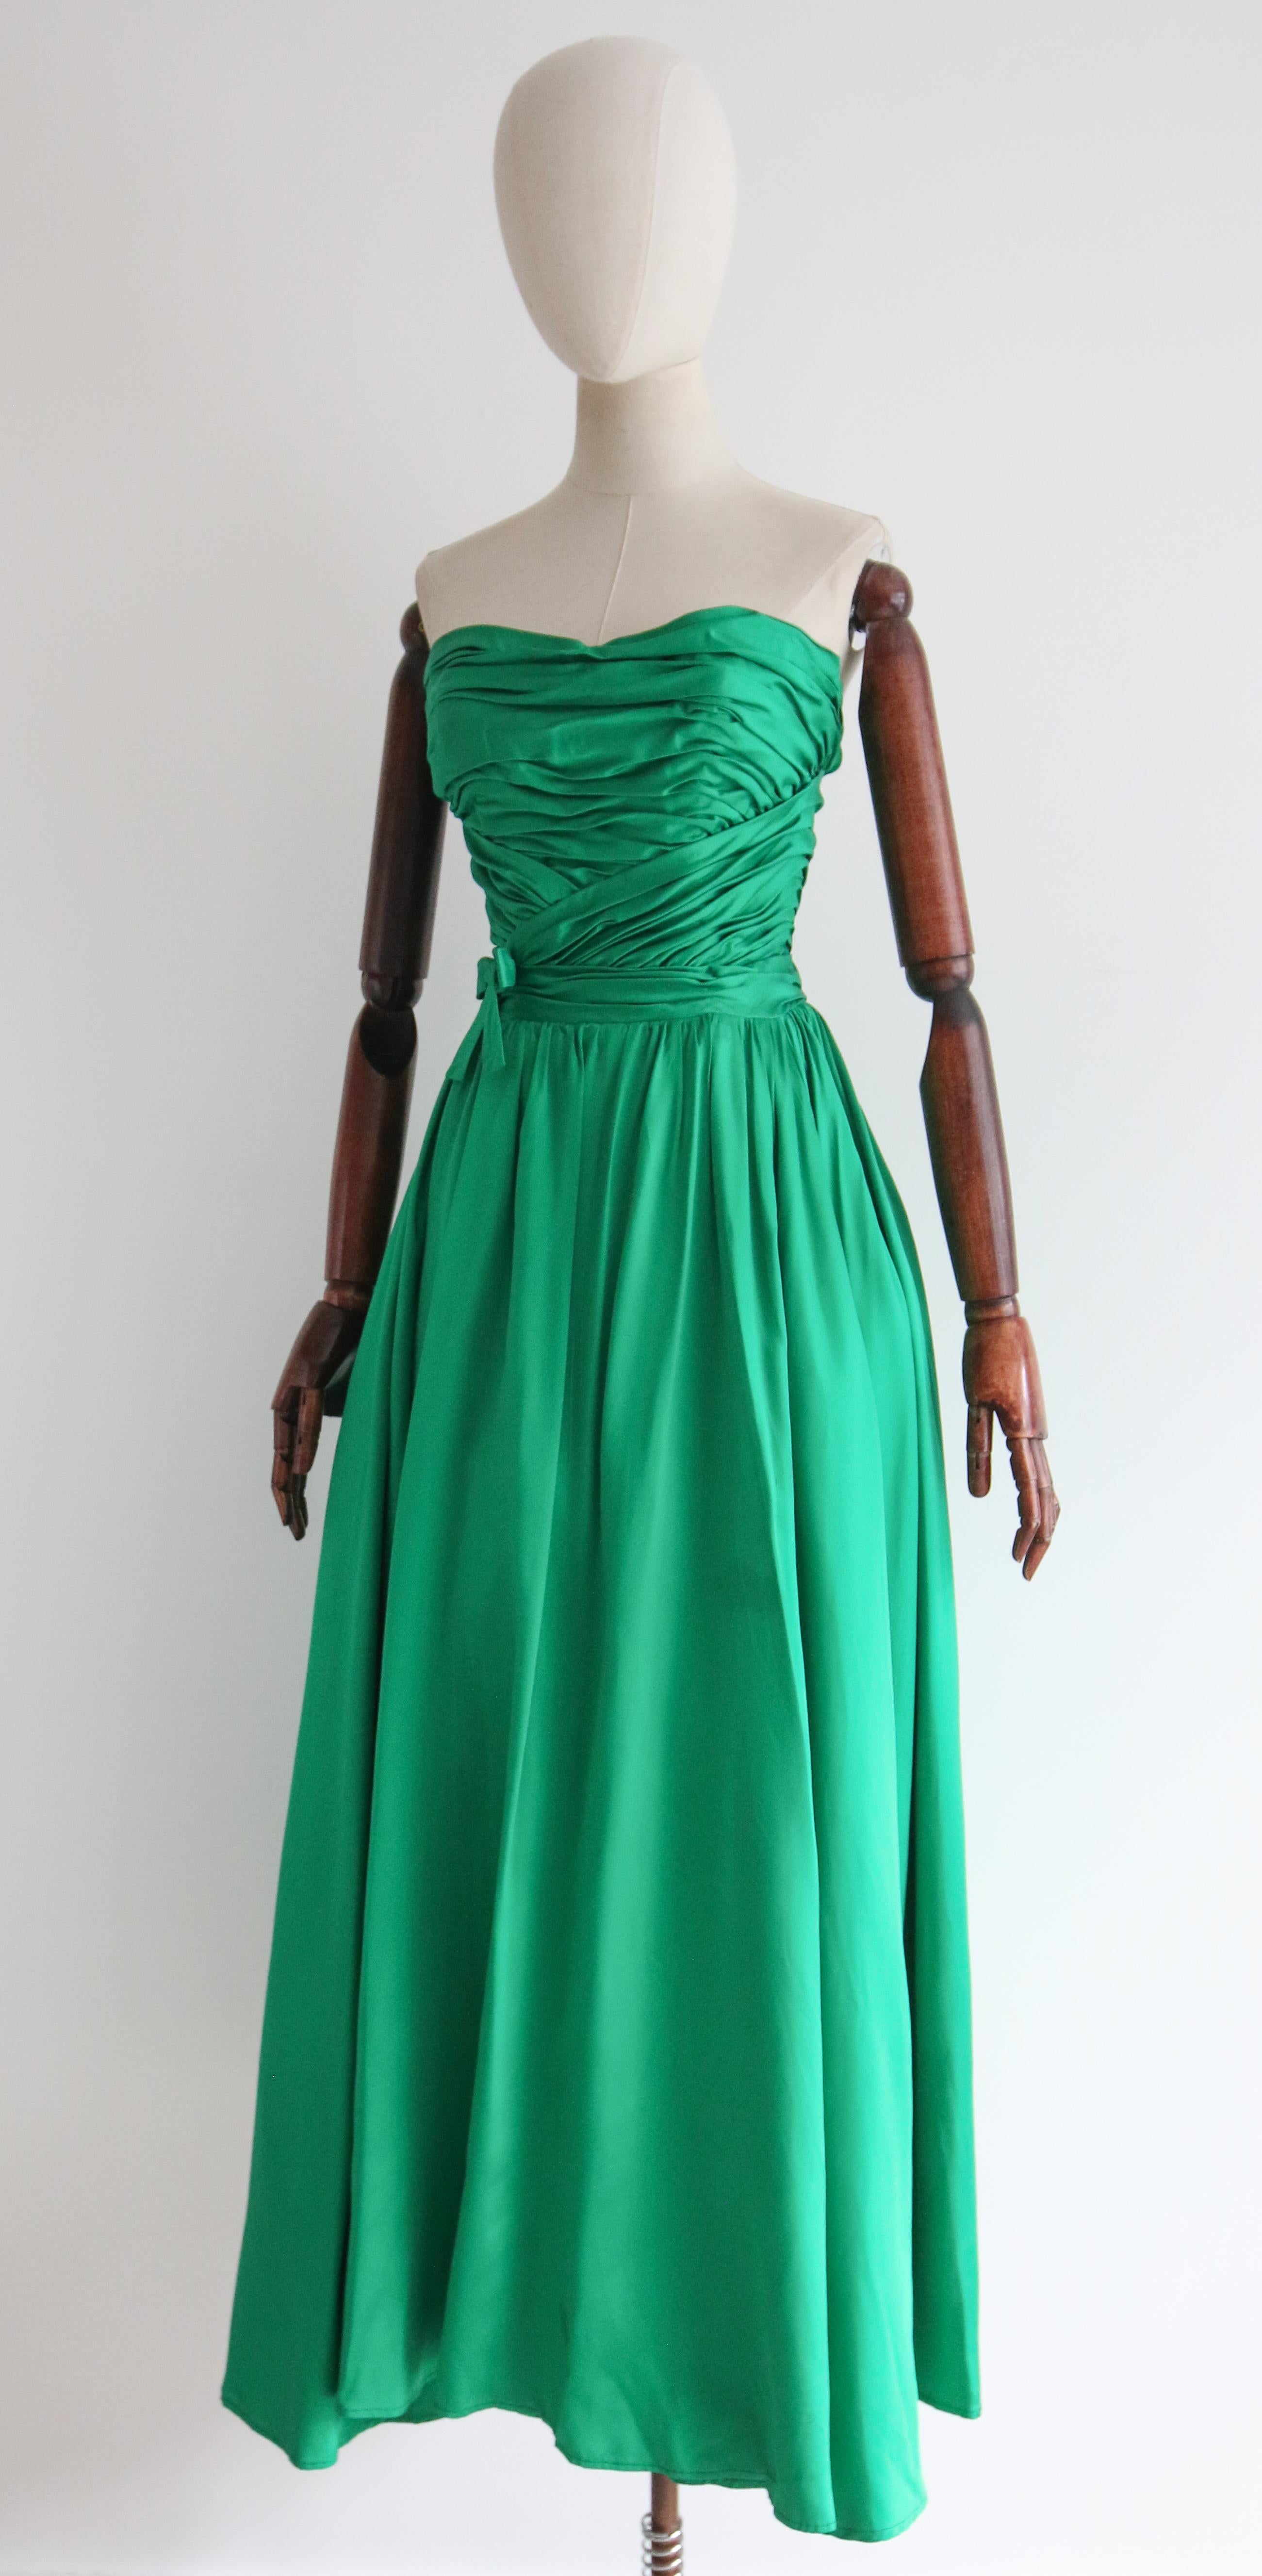 Vintage 1950's Emerald Green Satin Pleated Strapless Dress UK 6 US 2 Susan Small For Sale 4